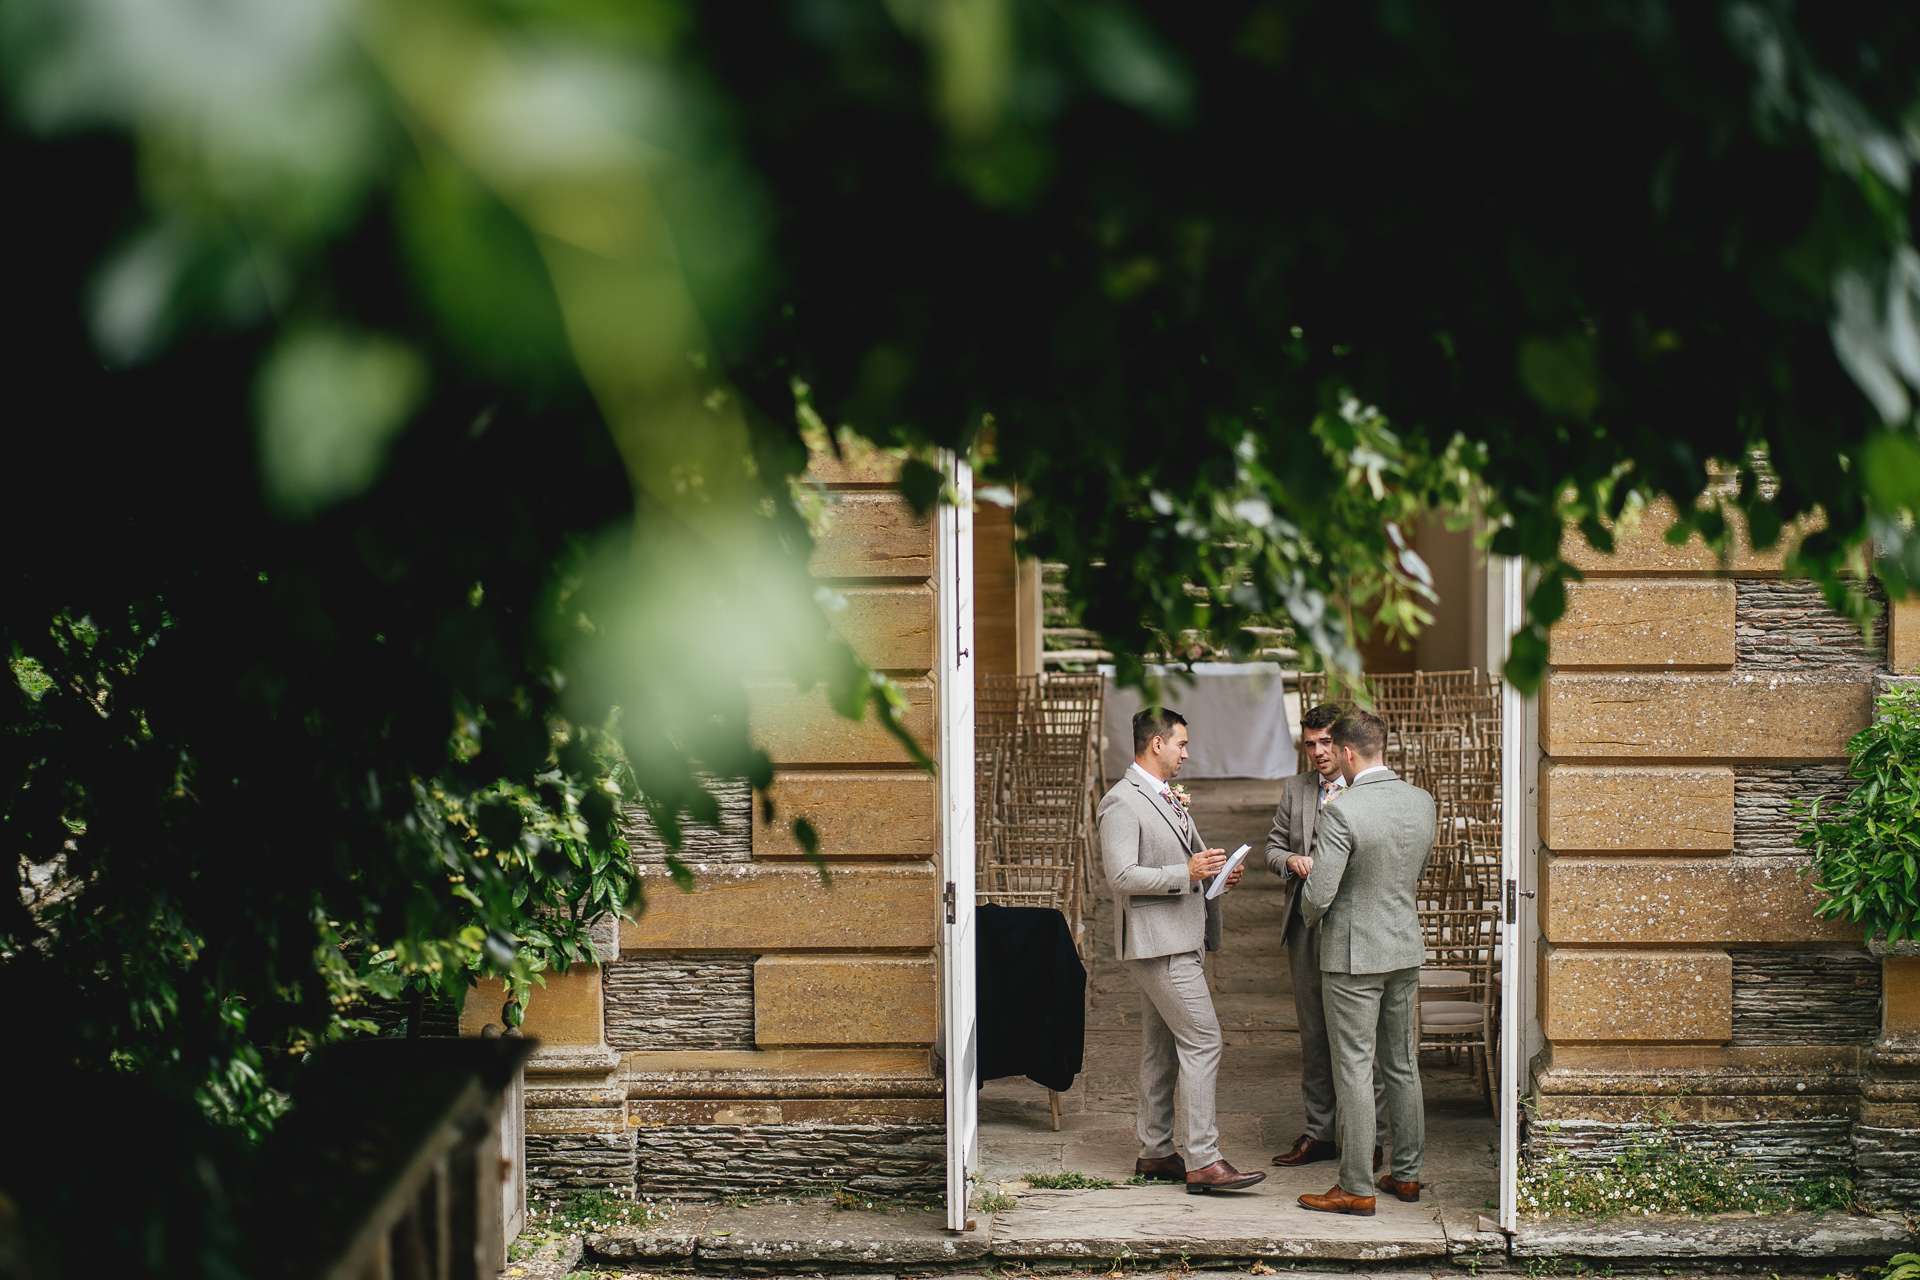 A groom and groomsmen standing together at the entrance to the orangery at Hestercombe Gardens